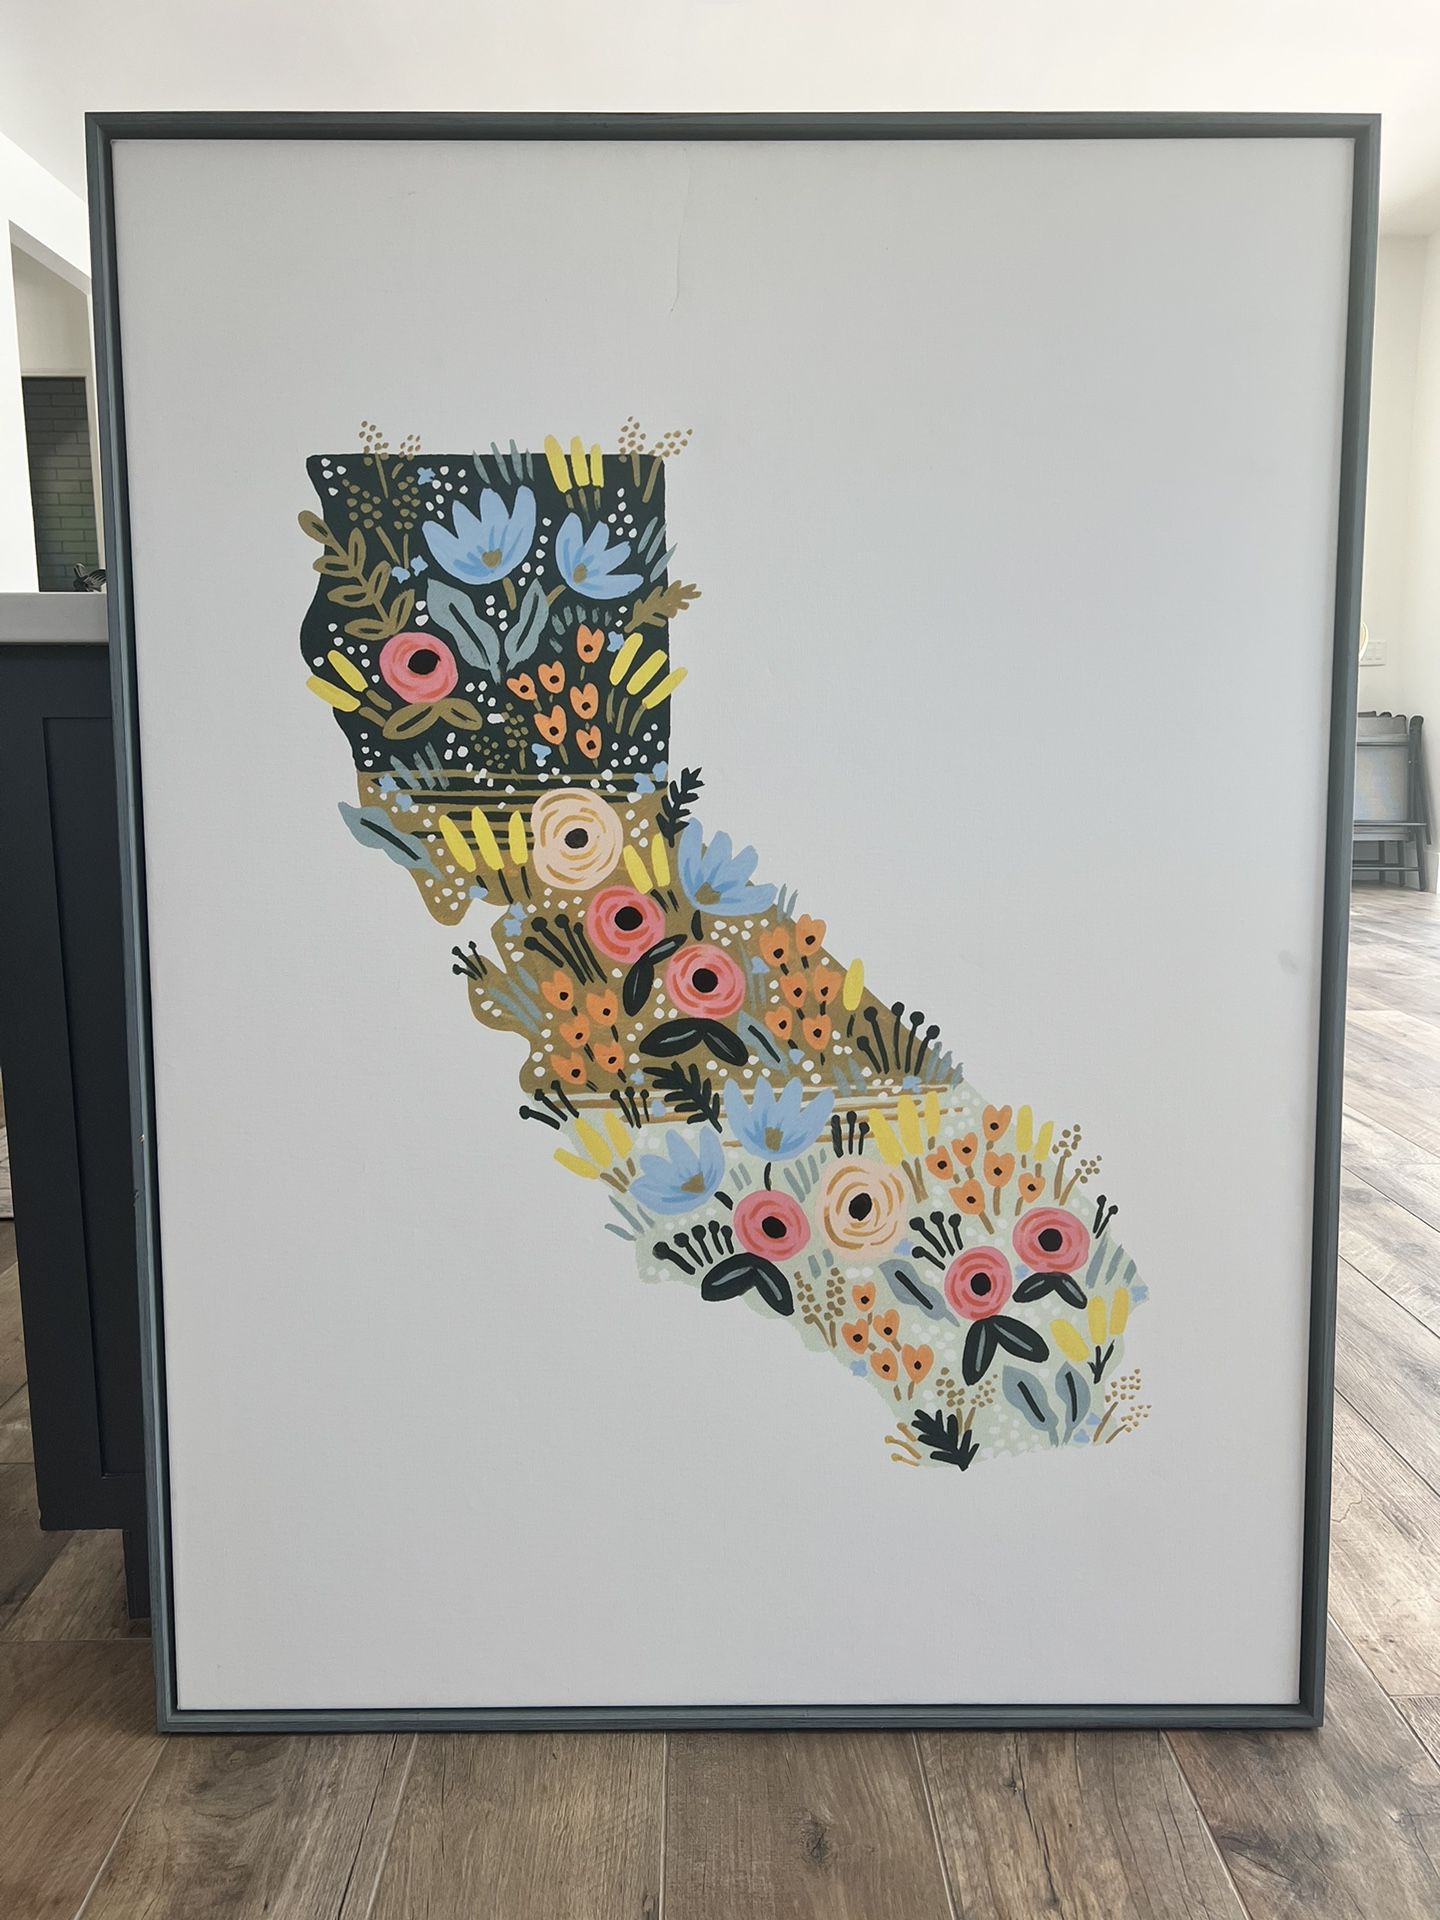 State Of California Art On Canvas $75